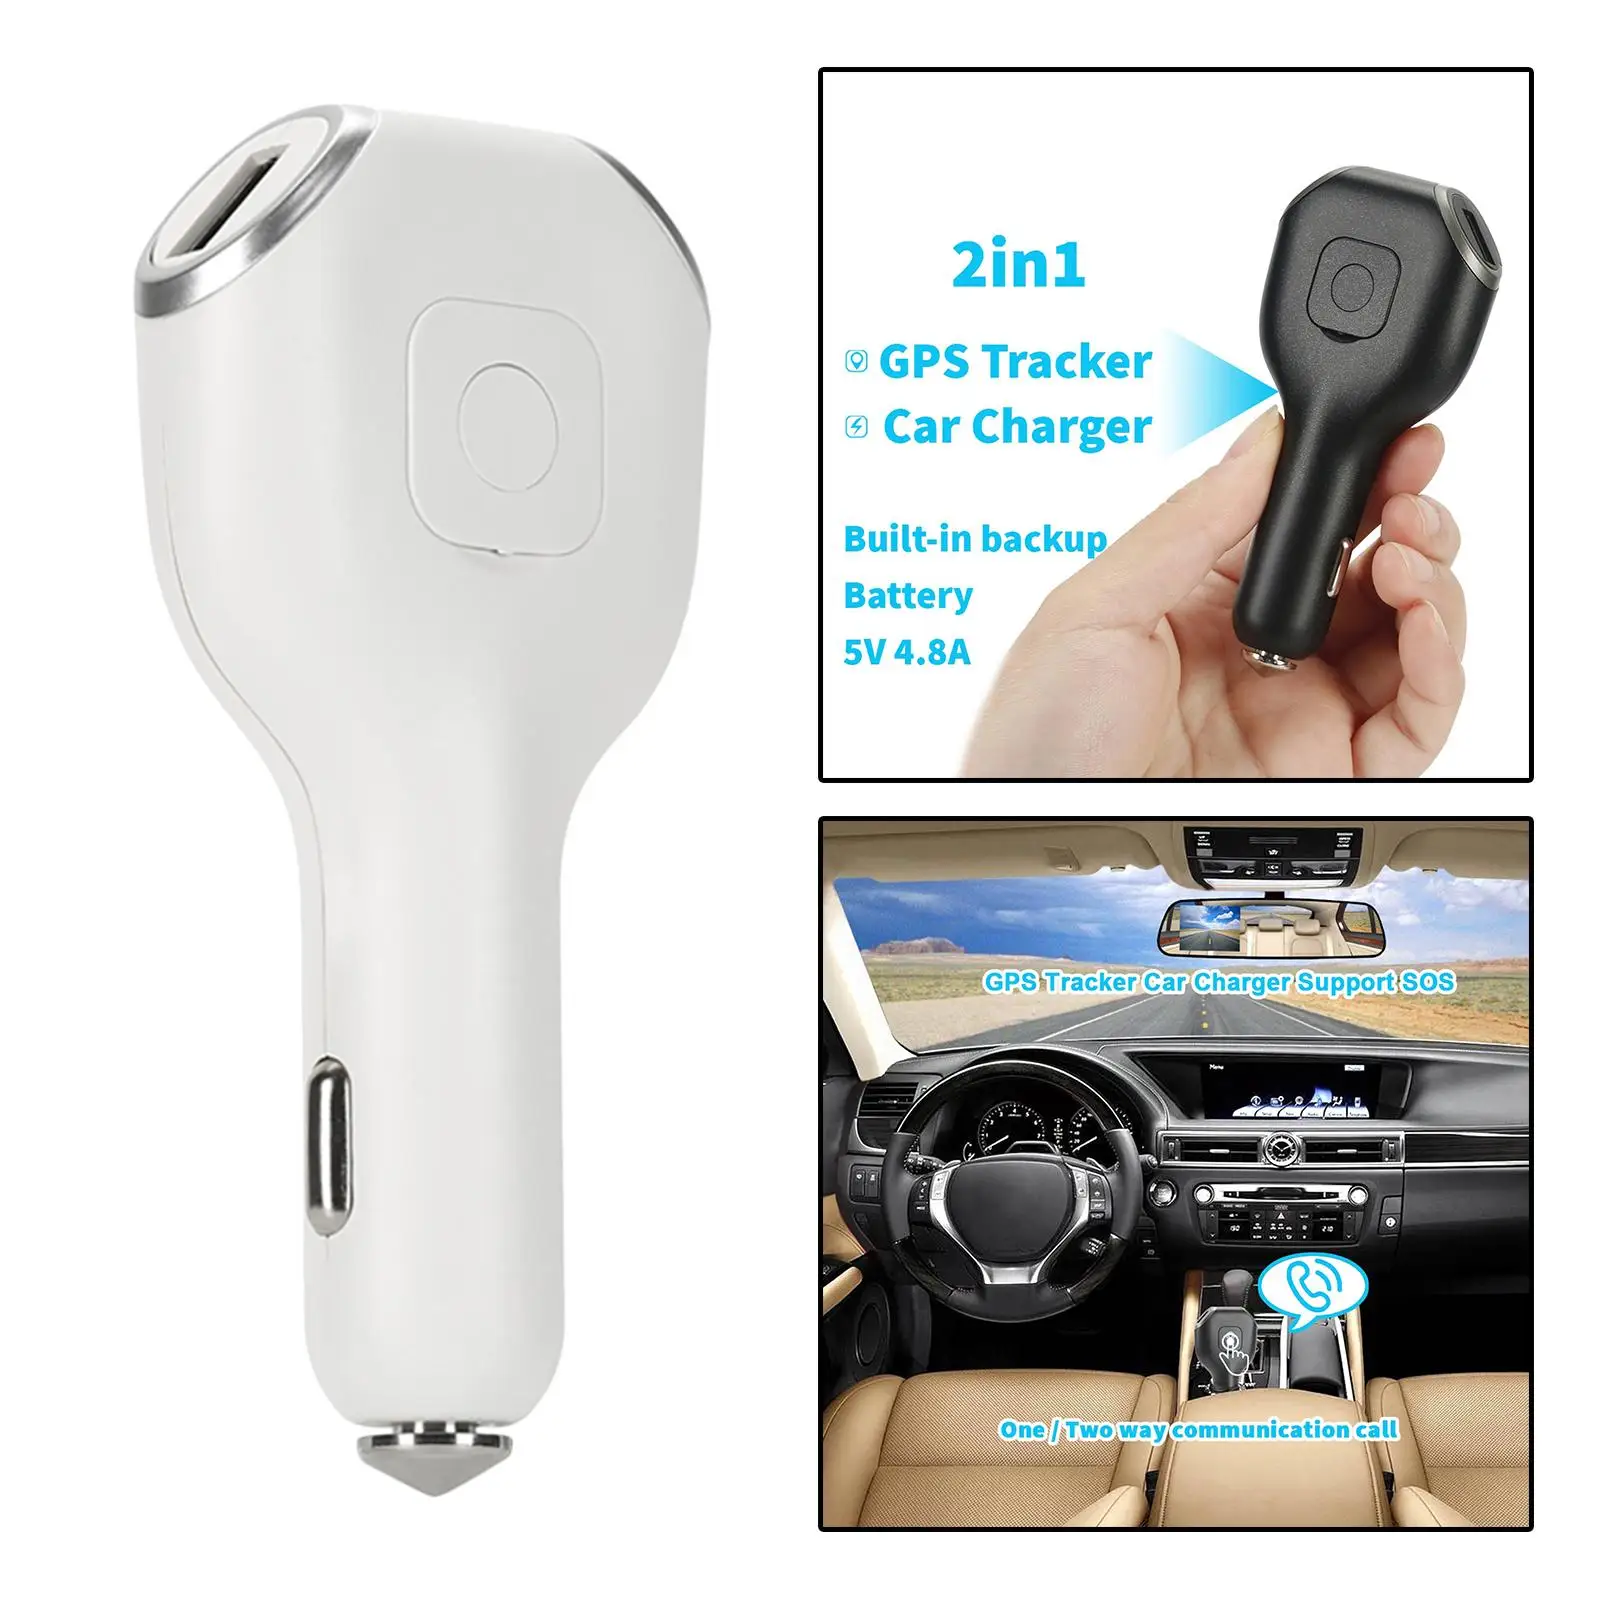 Multifunction Portable Car Charger Fast Car Charger Adapter for IOS Android